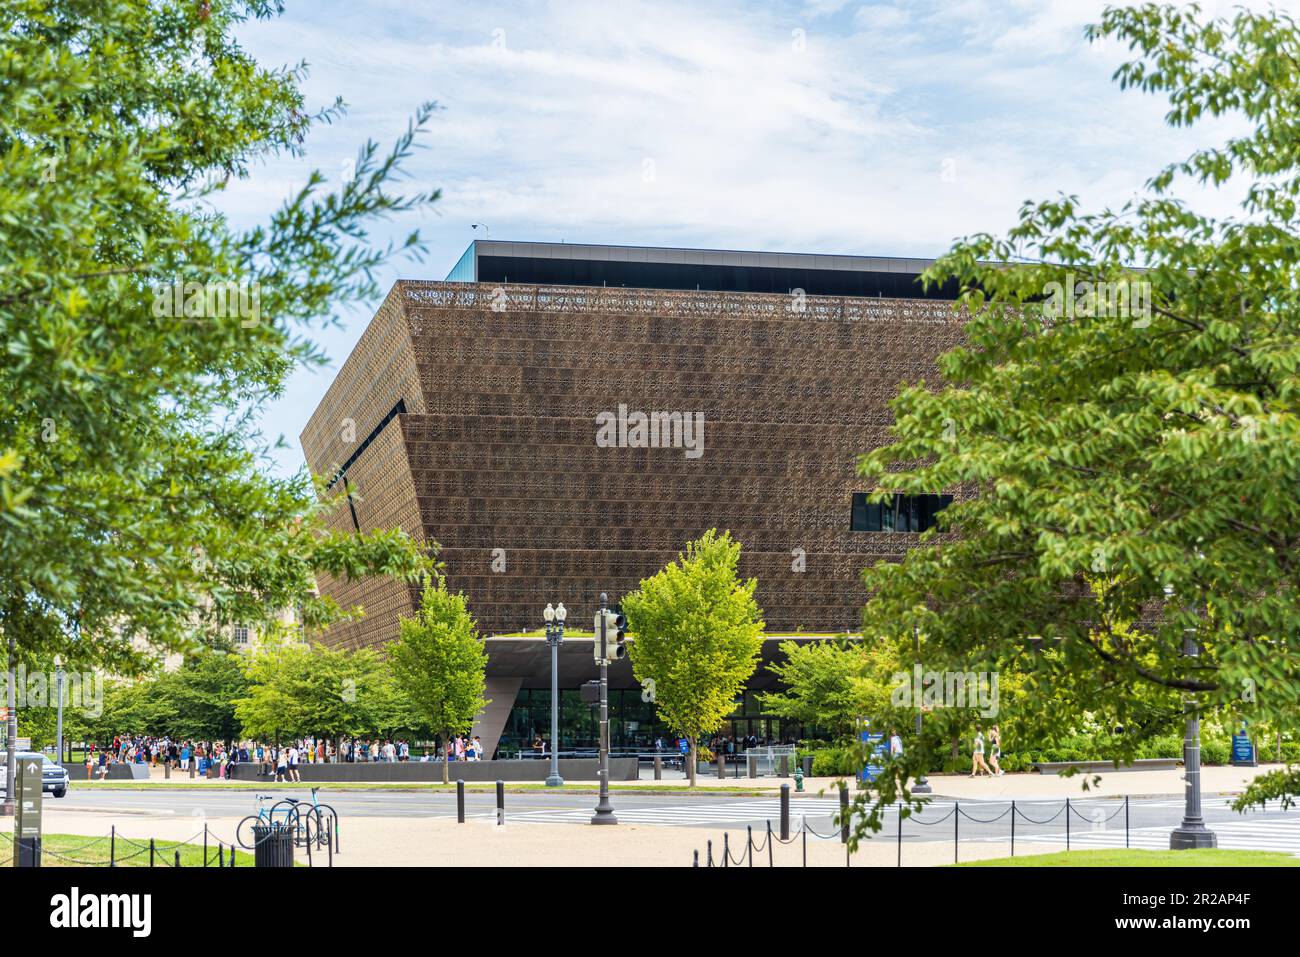 WASHINGTON DC, MAY 10: View of Smithsonian National Museum of African American History and Culture NMAAHC Stock Photo